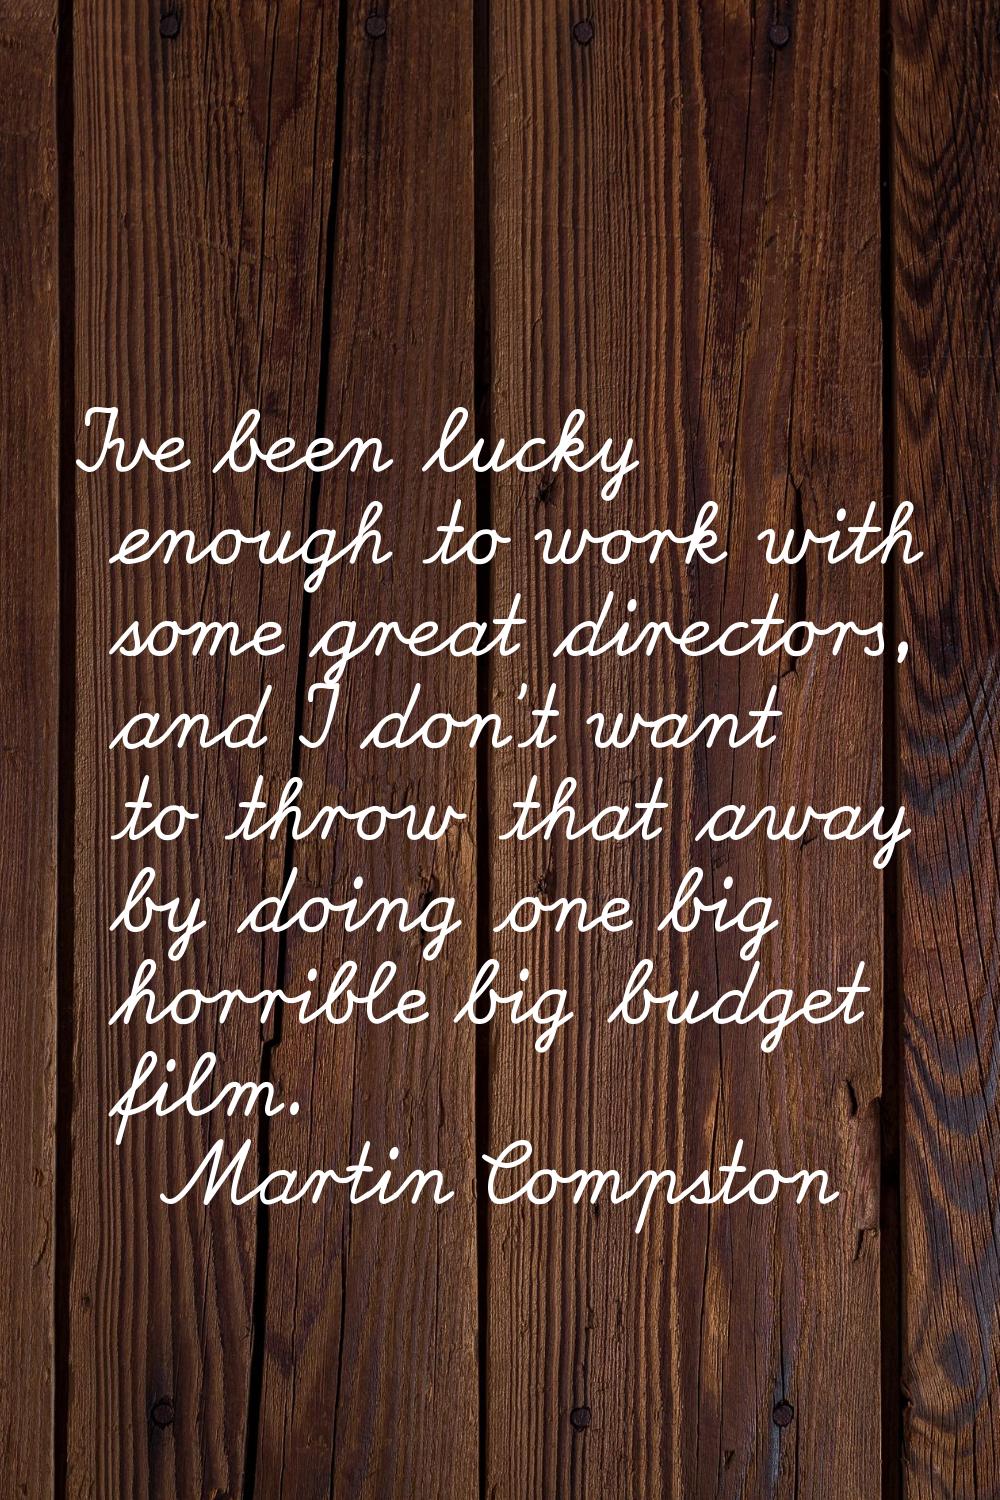 I've been lucky enough to work with some great directors, and I don't want to throw that away by do